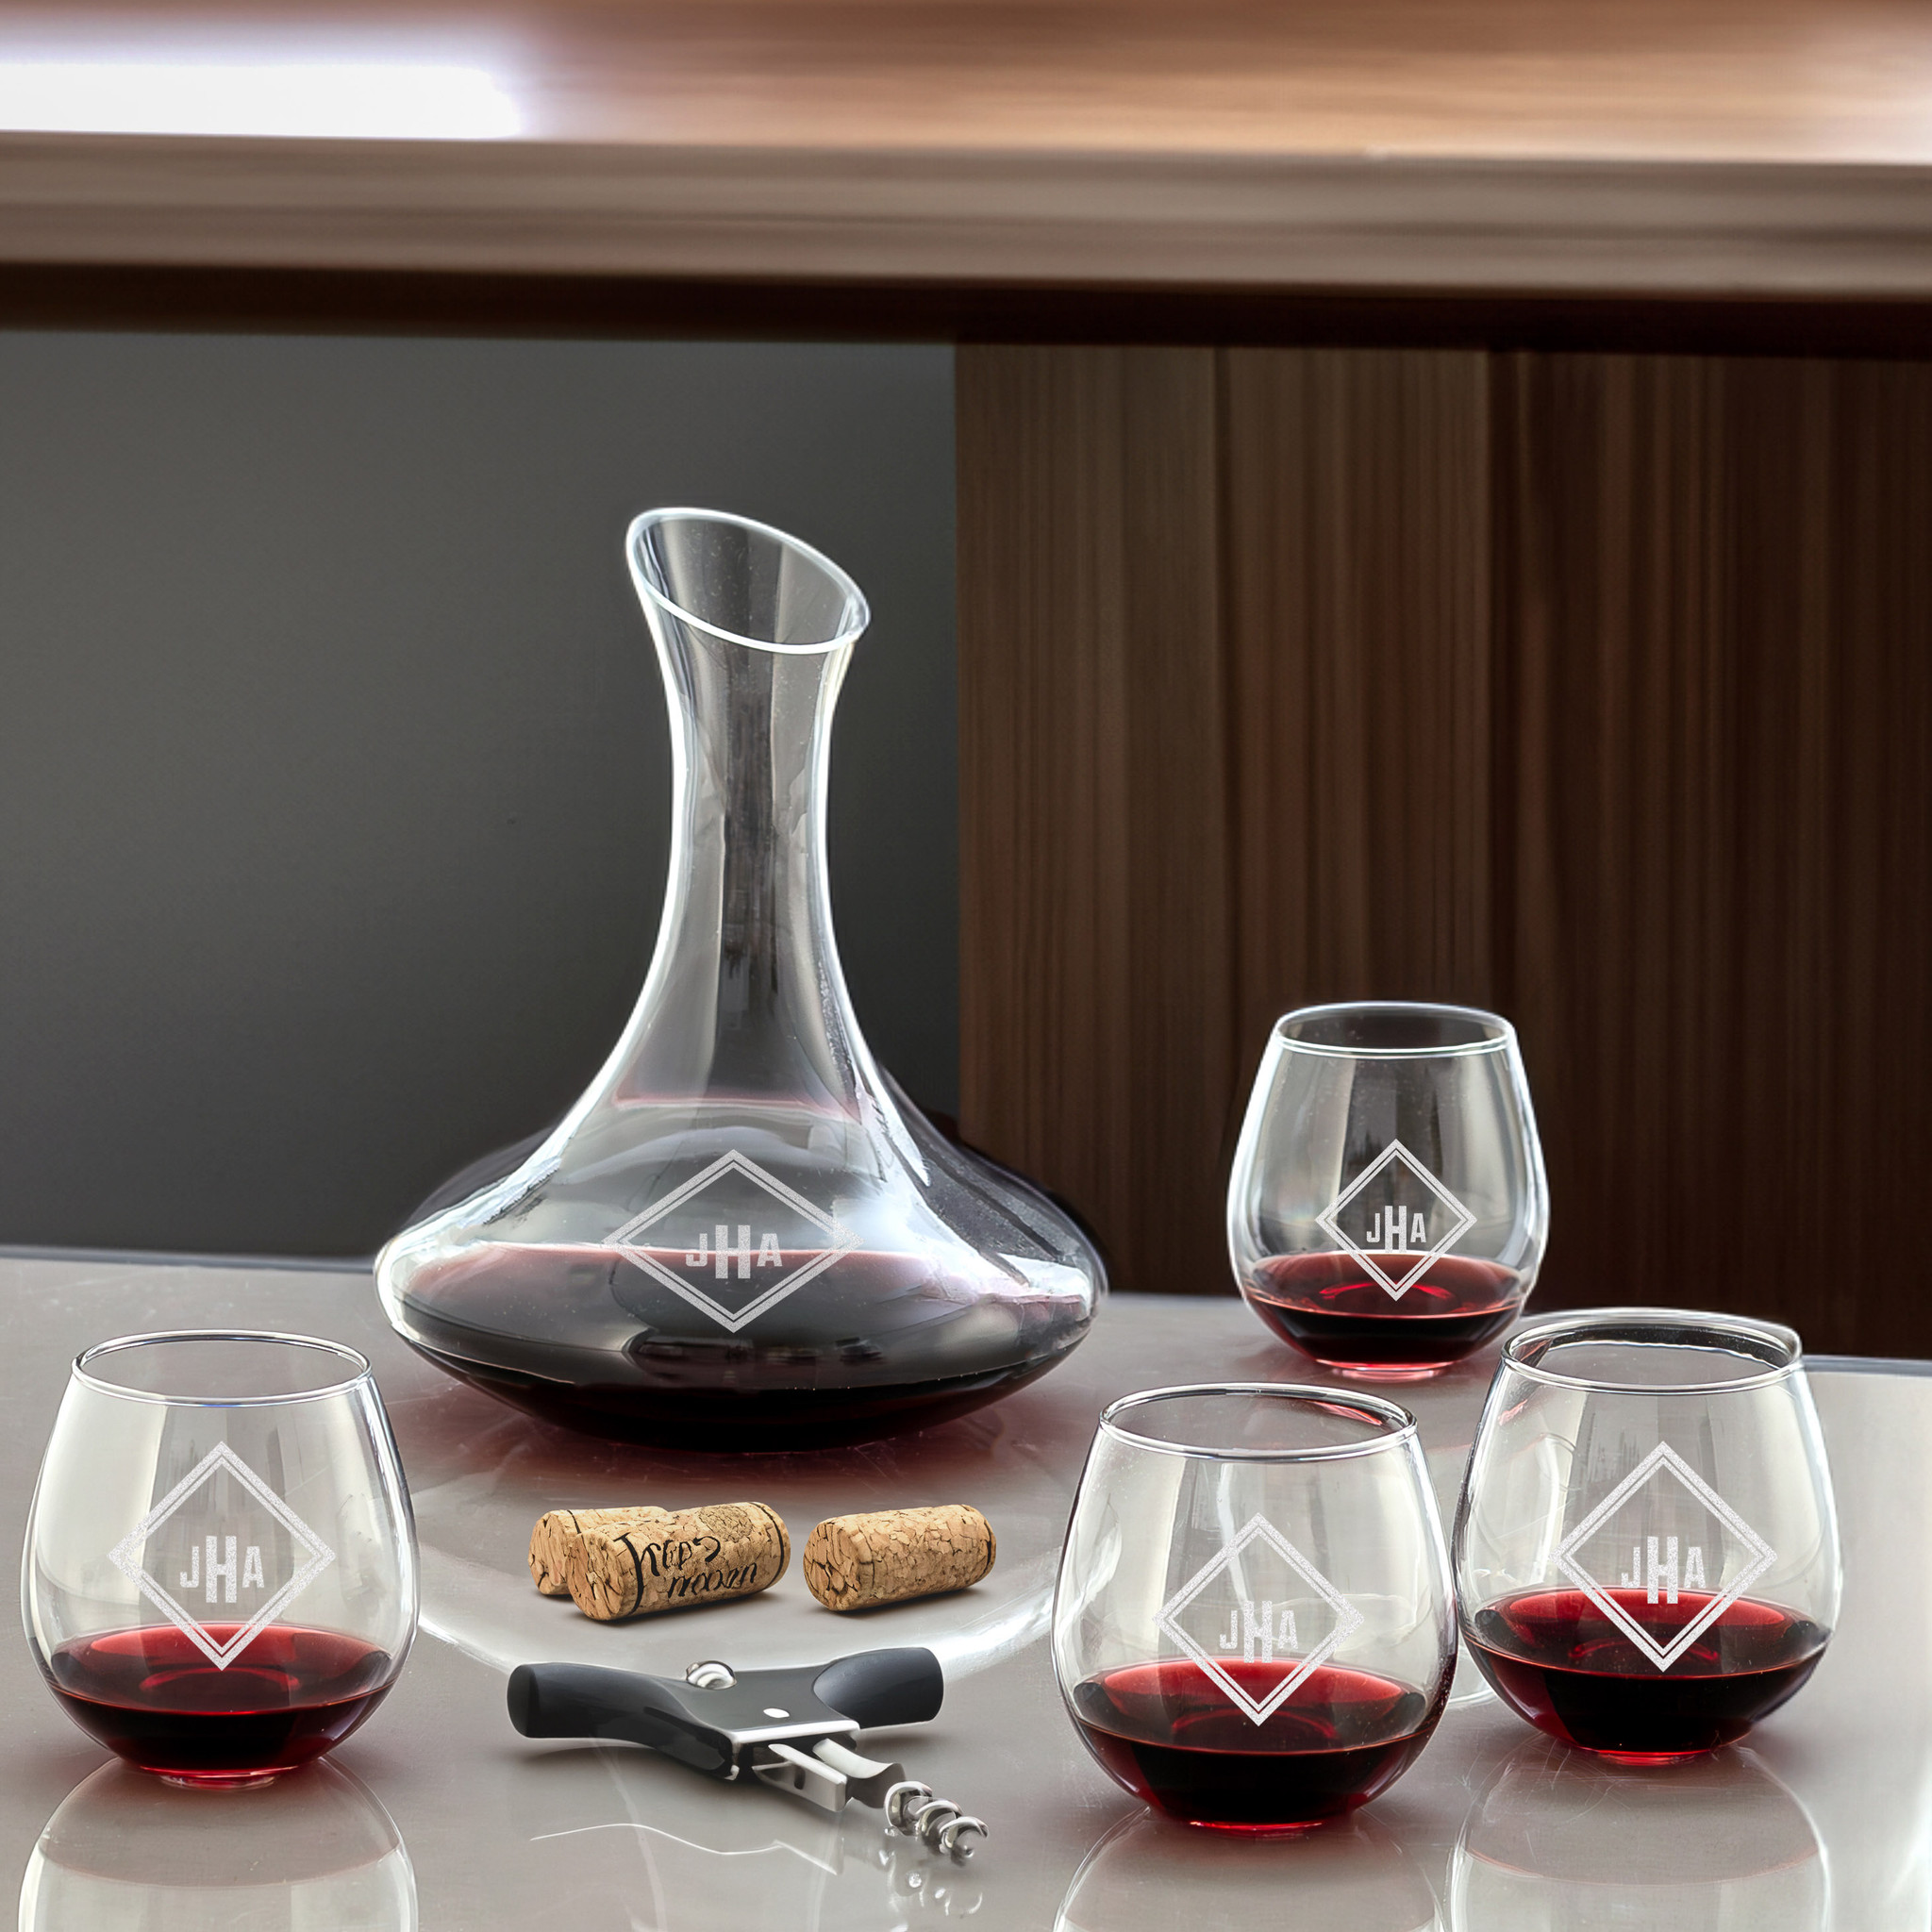 Etched Wine Glass Set and Red Wine